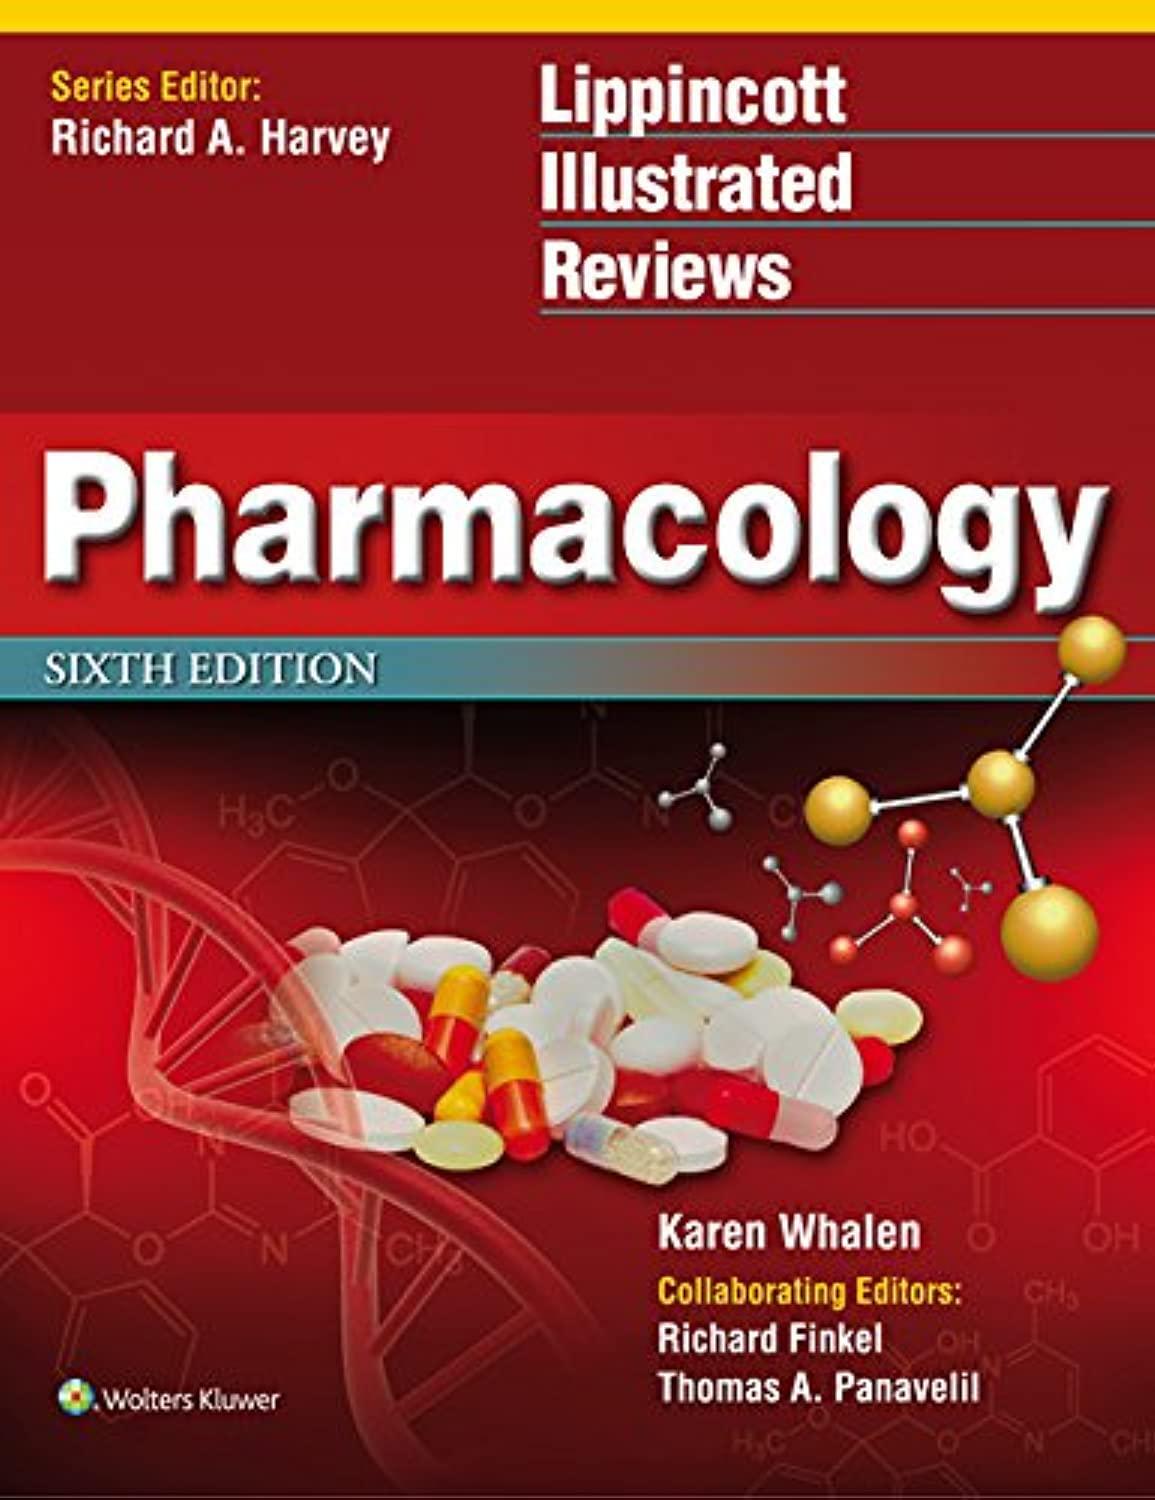 lippincott illustrated reviews pharmacology 6th edition karen whalen, thomas a. panavelil 1451191774,